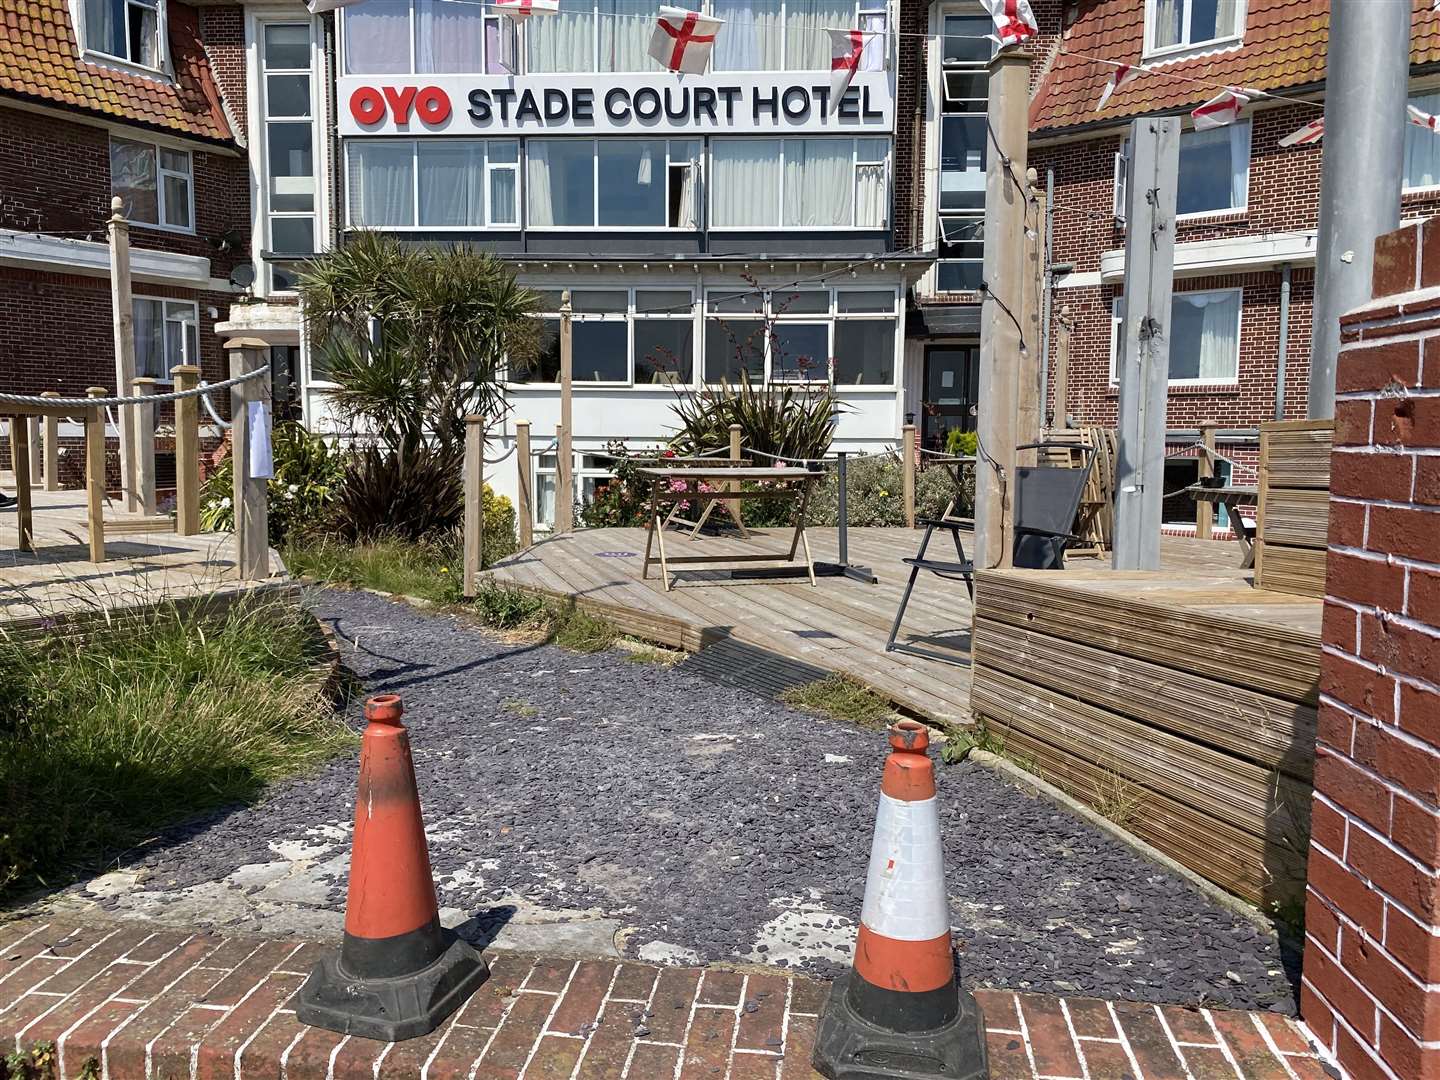 Stade Court Hotel, Hythe, is being used to accommodate asylum seekers